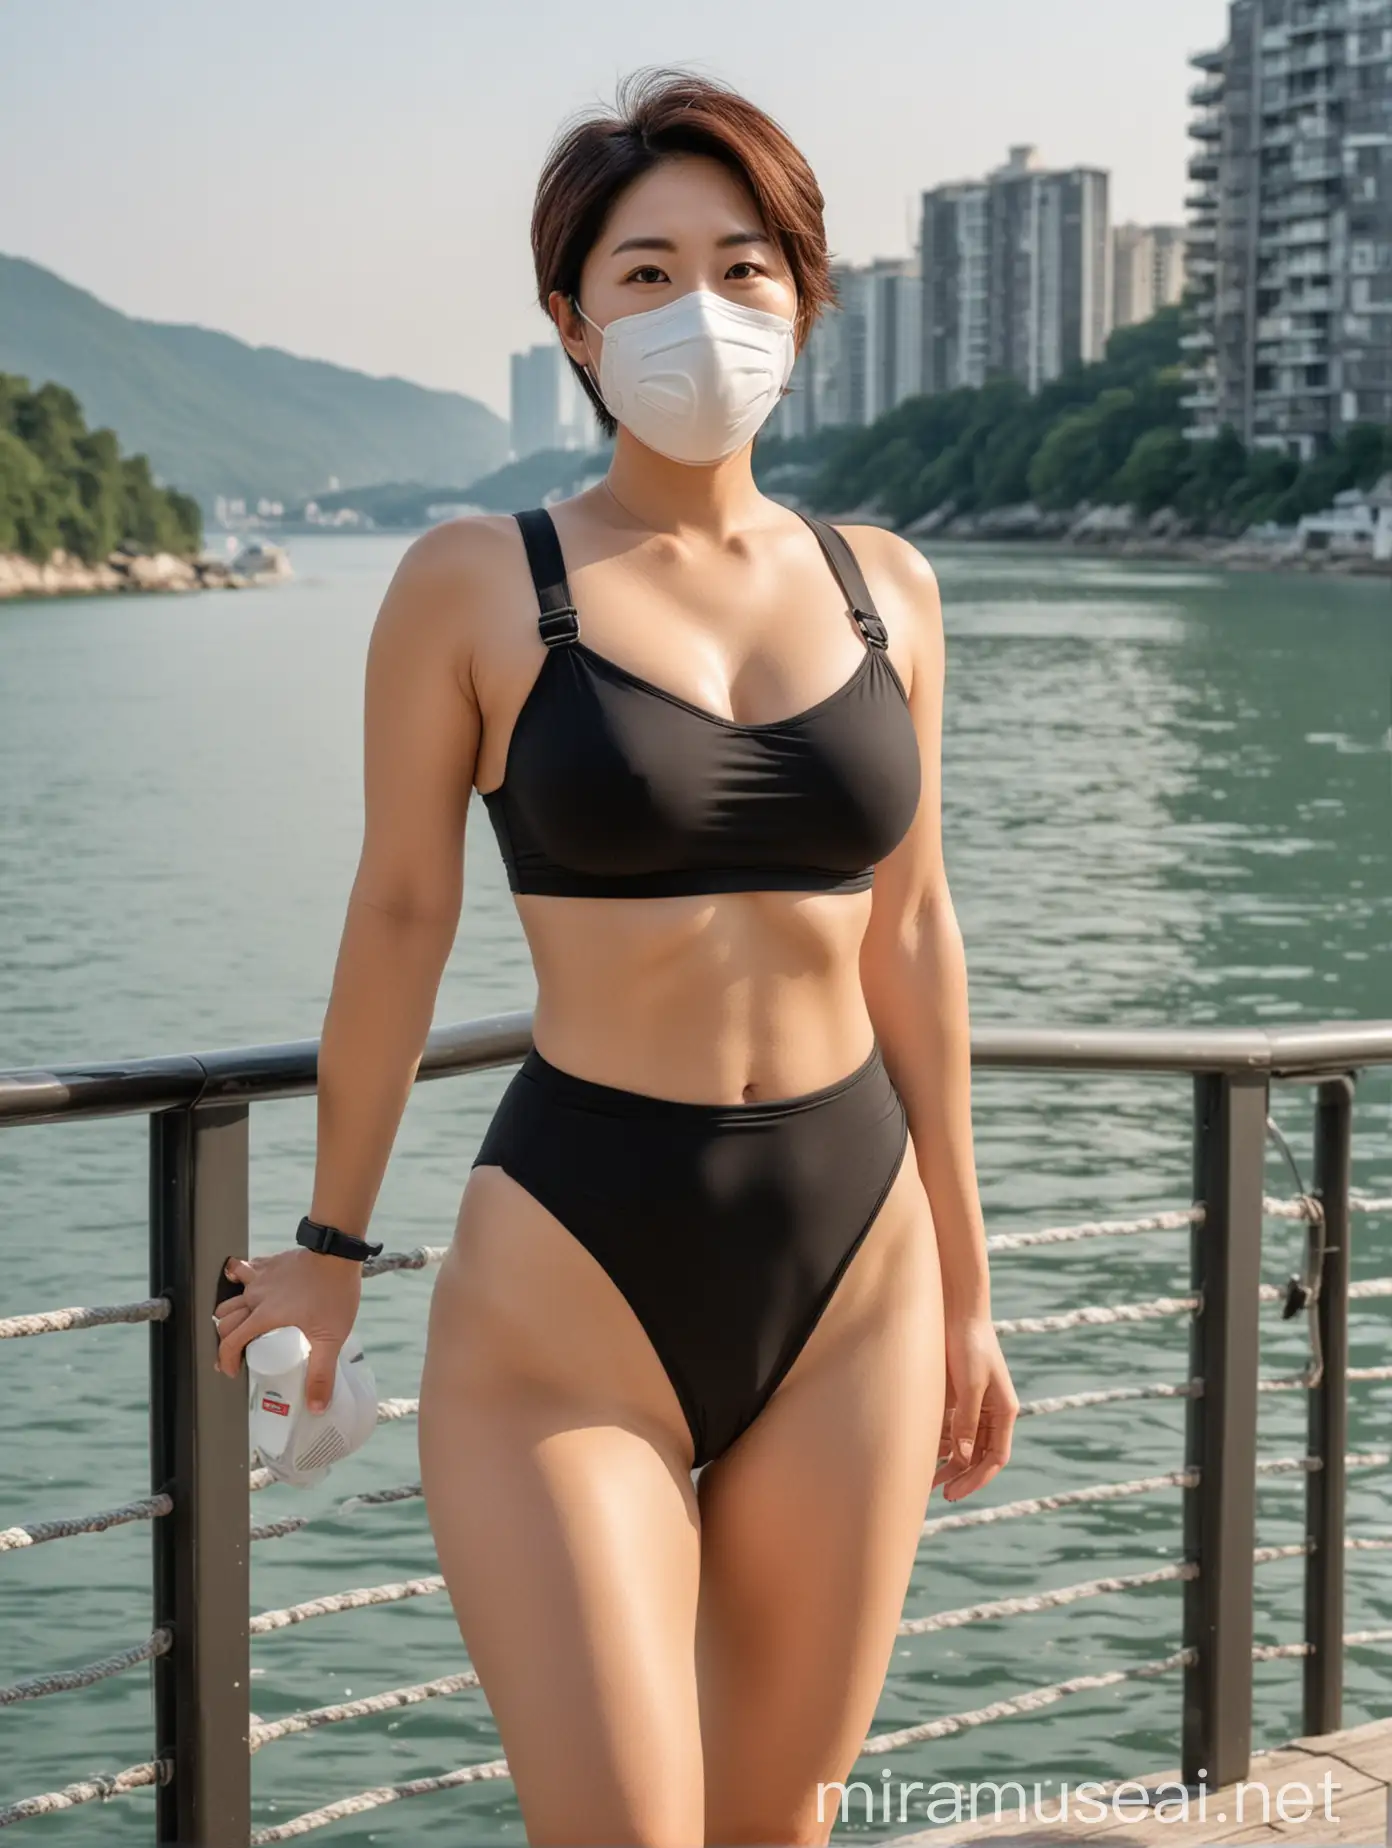 Sporty Korean Woman in Respirator Mask Poses on Sunny Lakeside Deck